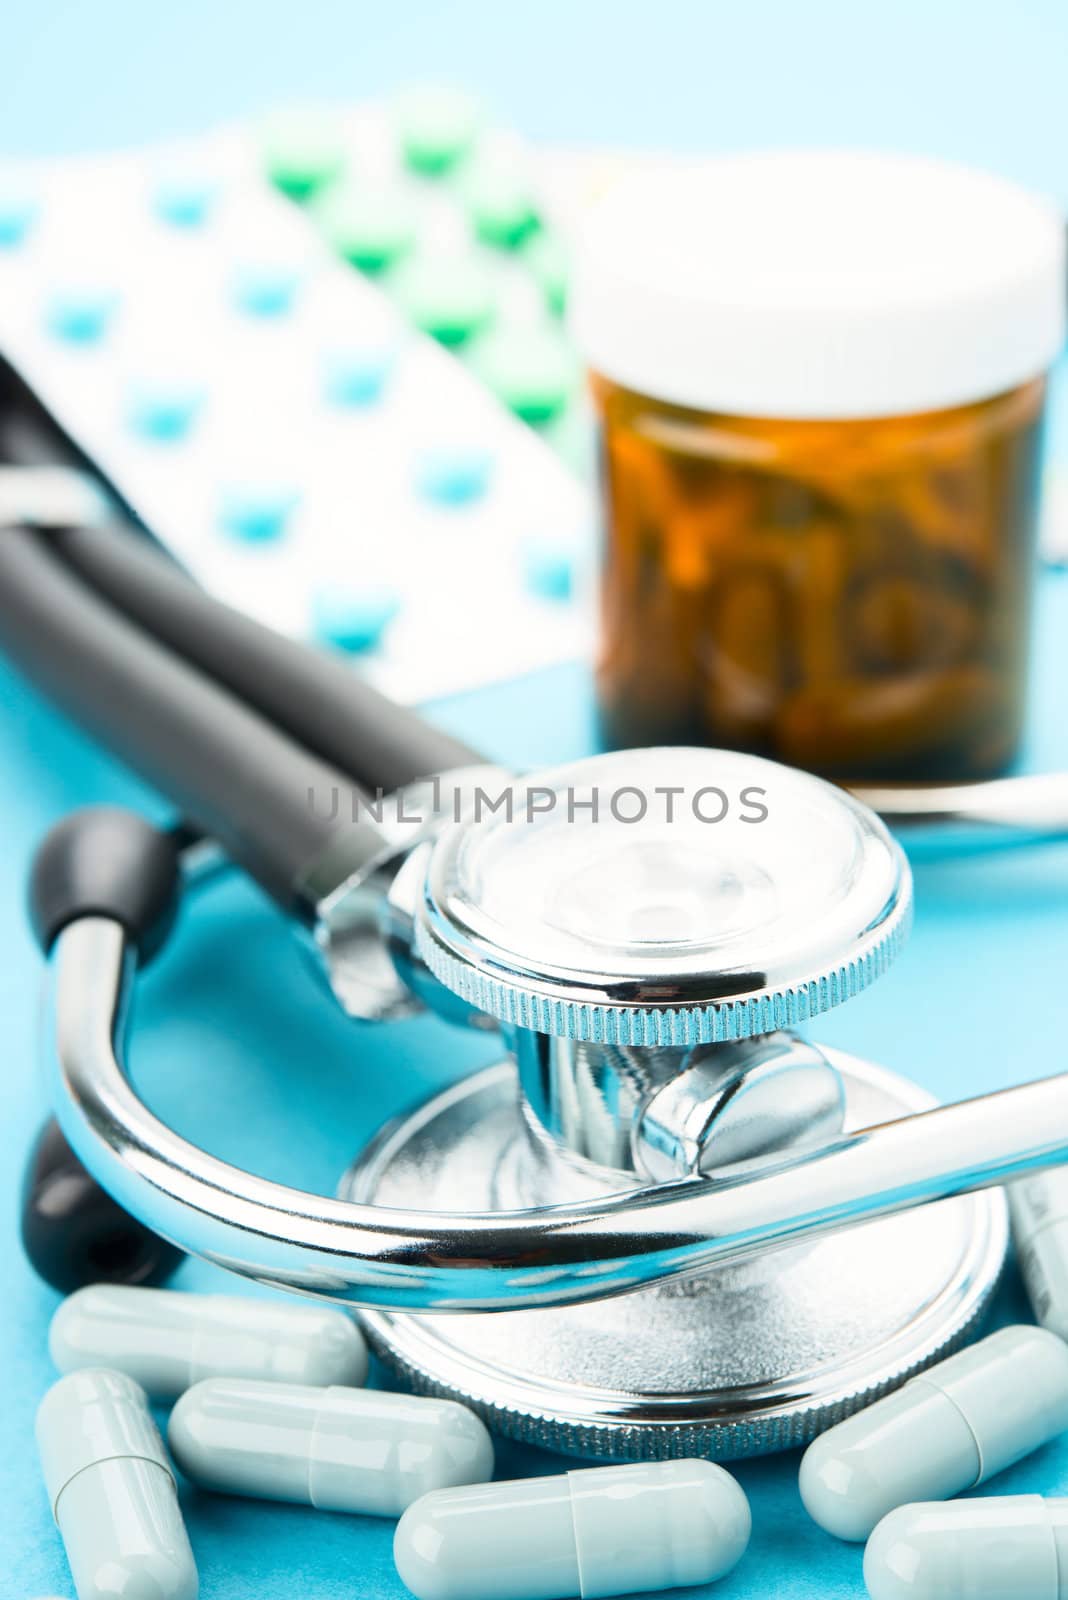 Pills and stethoscope on blue bacground